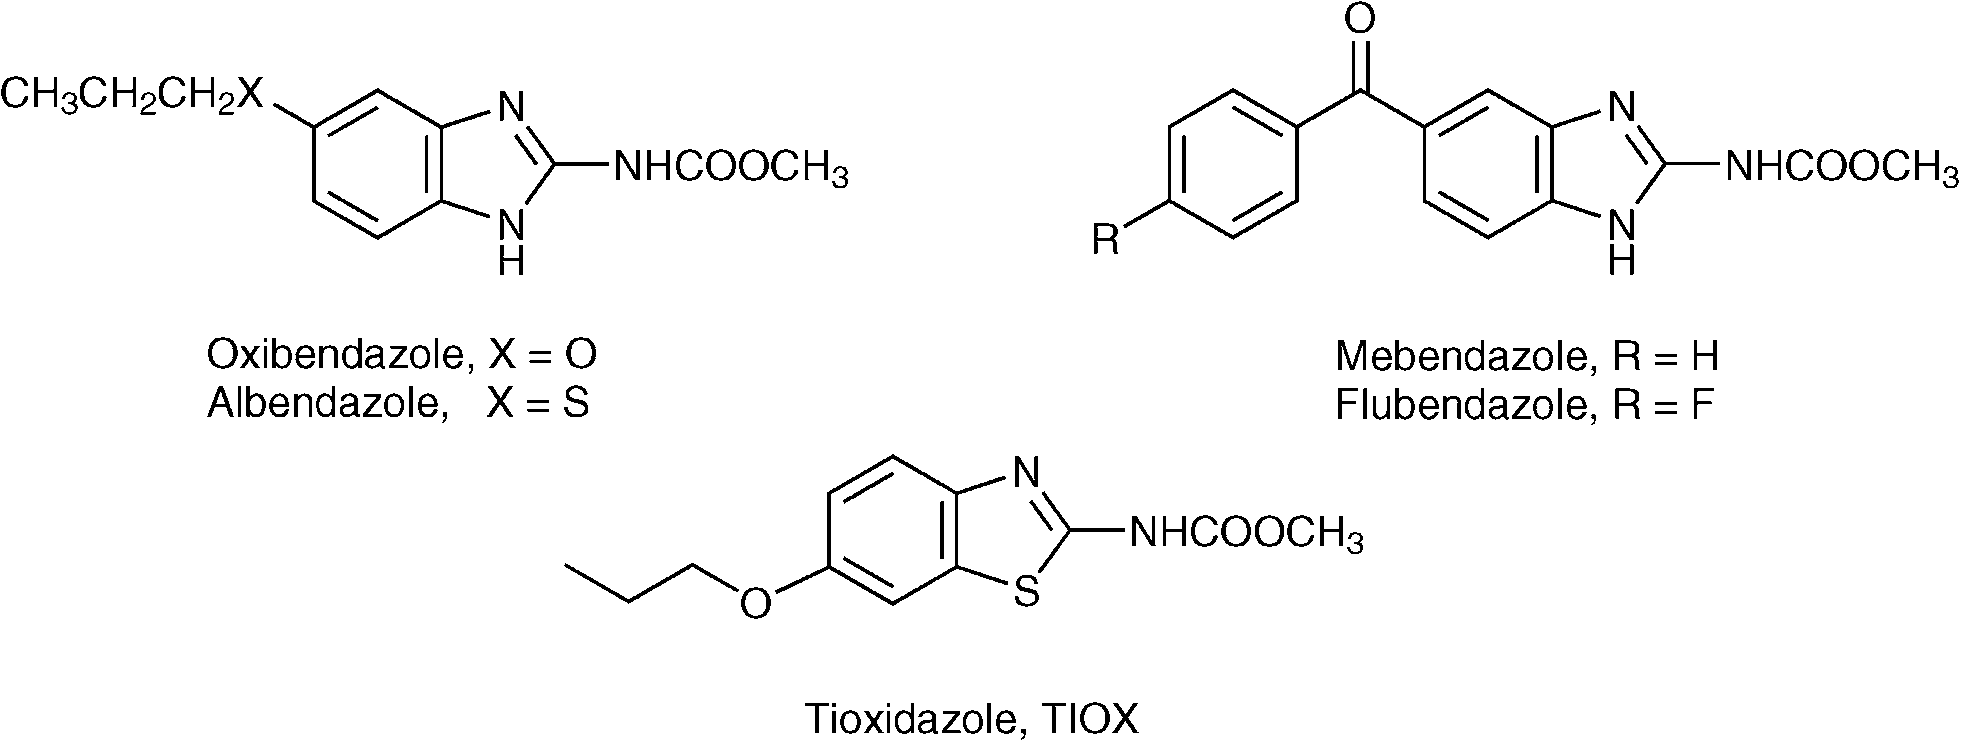 anthelmintic agents synthesis)